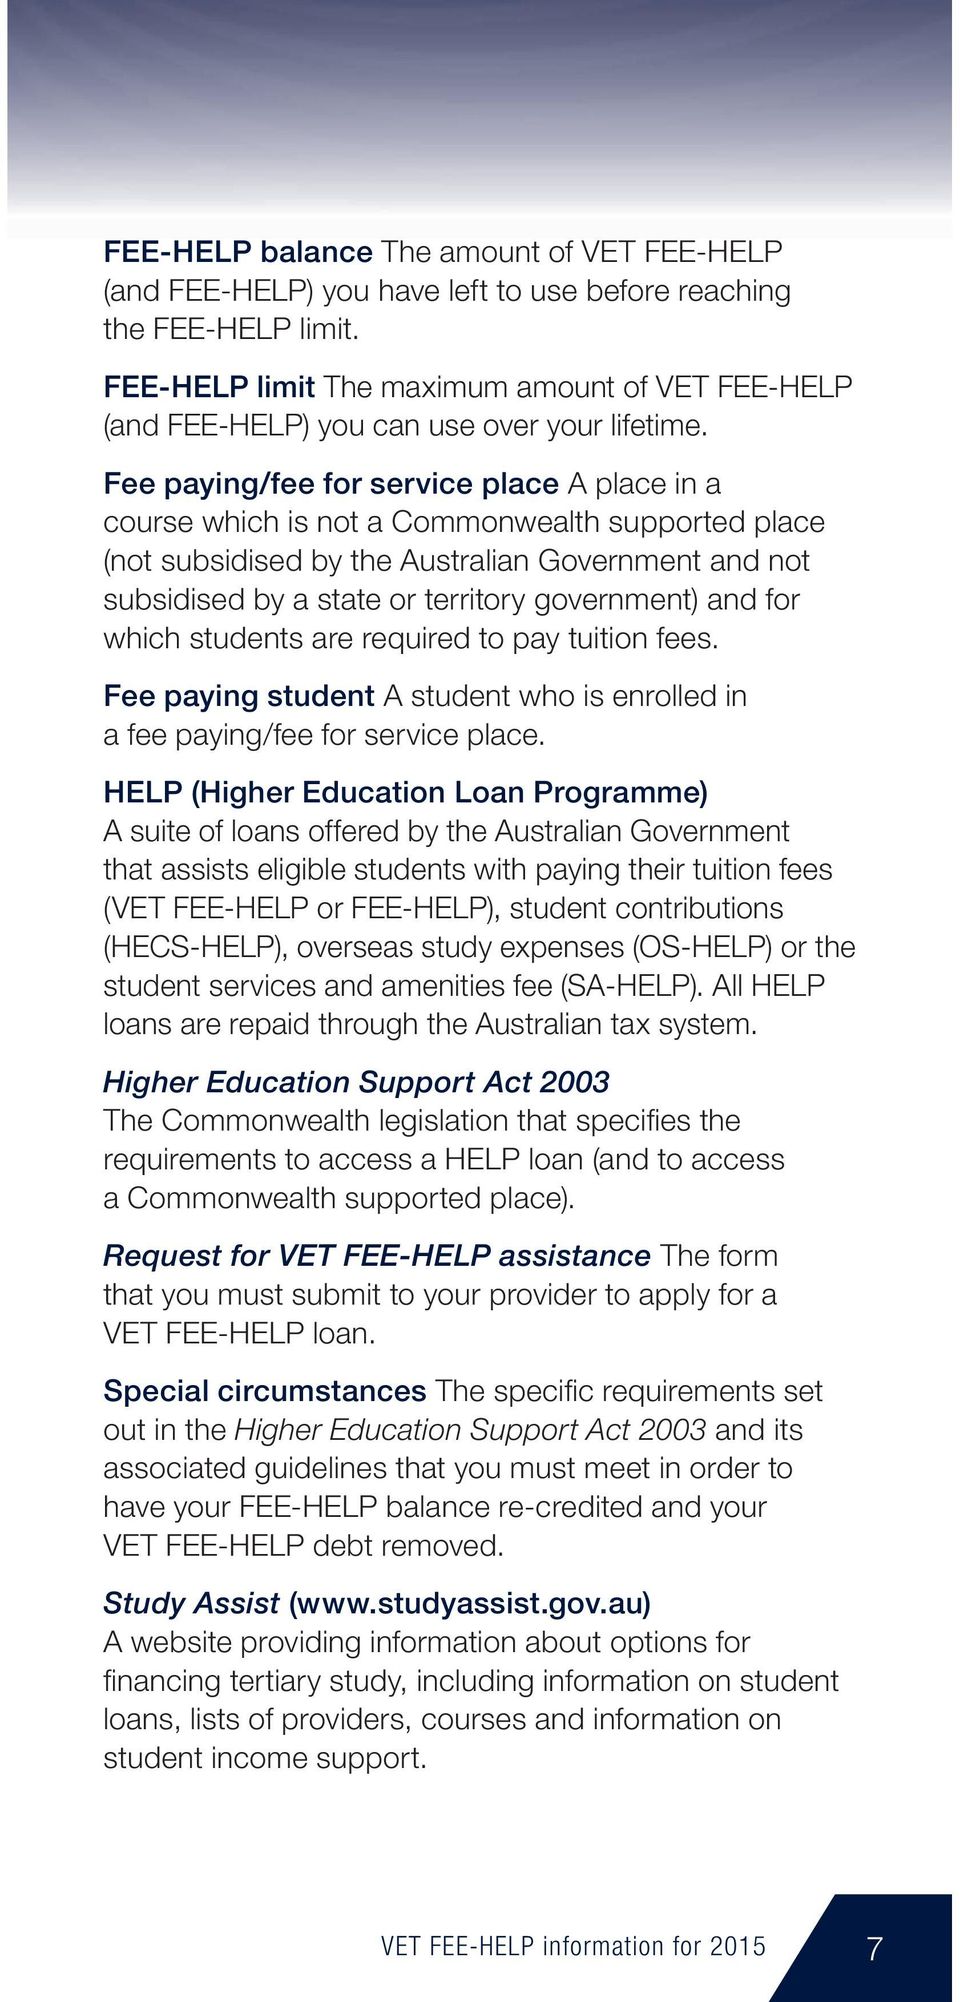 Fee paying/fee for service place A place in a course which is not a Commonwealth supported place (not subsidised by the Australian Government and not subsidised by a state or territory government)